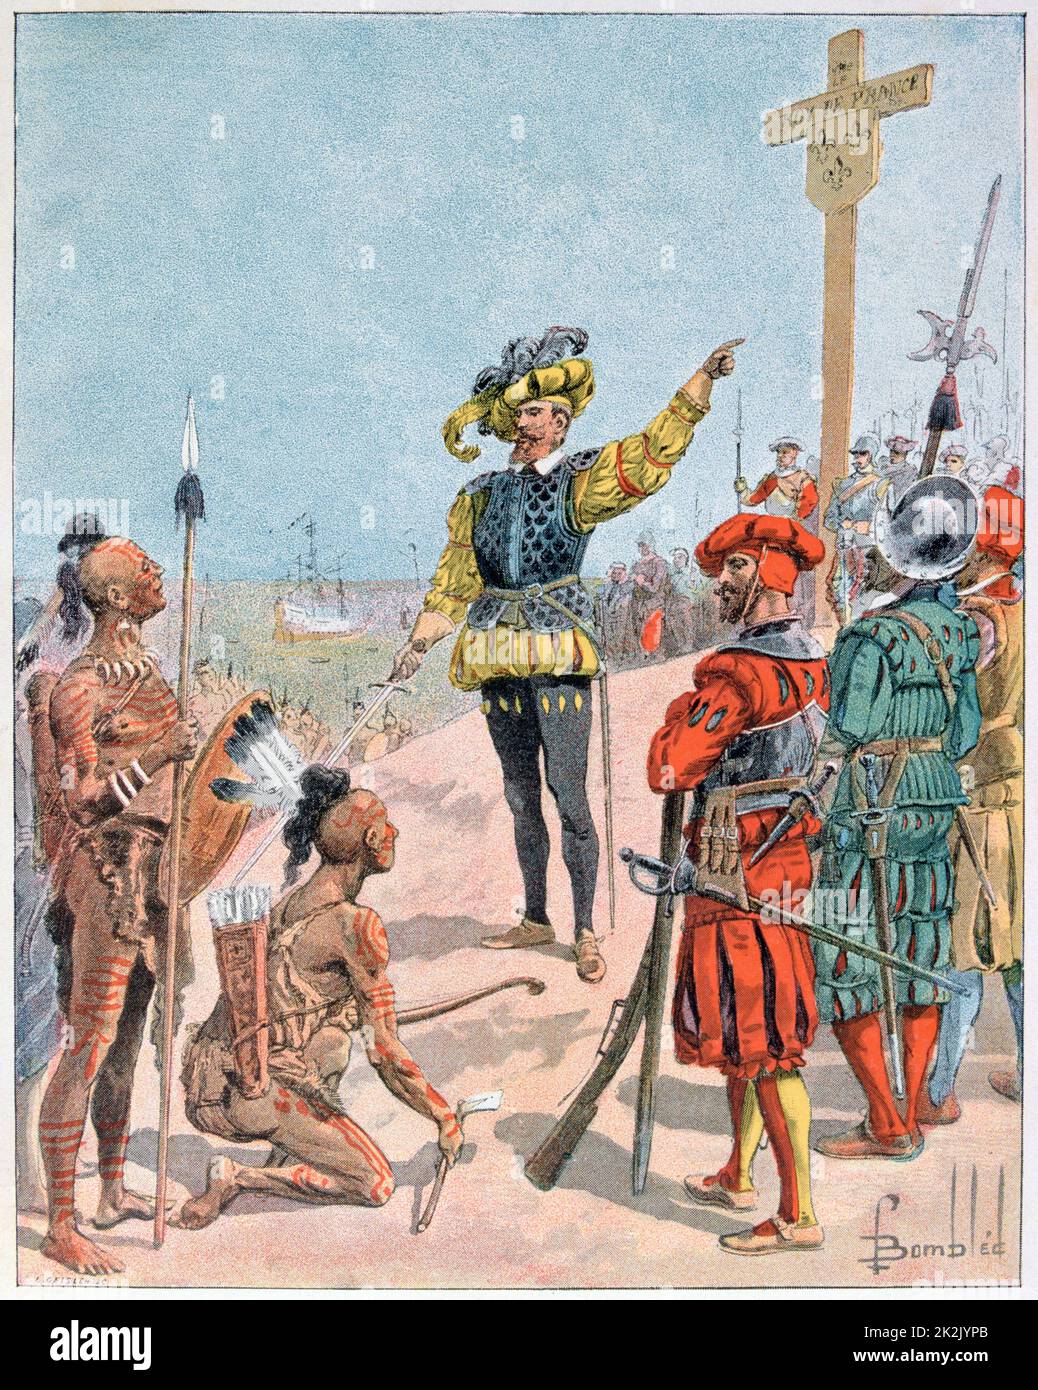 Jacques Cartier (1491-1557) French explorer on his first voyage making contact with St Lawrence Iroquoians on 24 July 1534, at Gaspe Bay, Canada, and planting a 10 metre cross claiming the territory in the name of France. Stock Photo